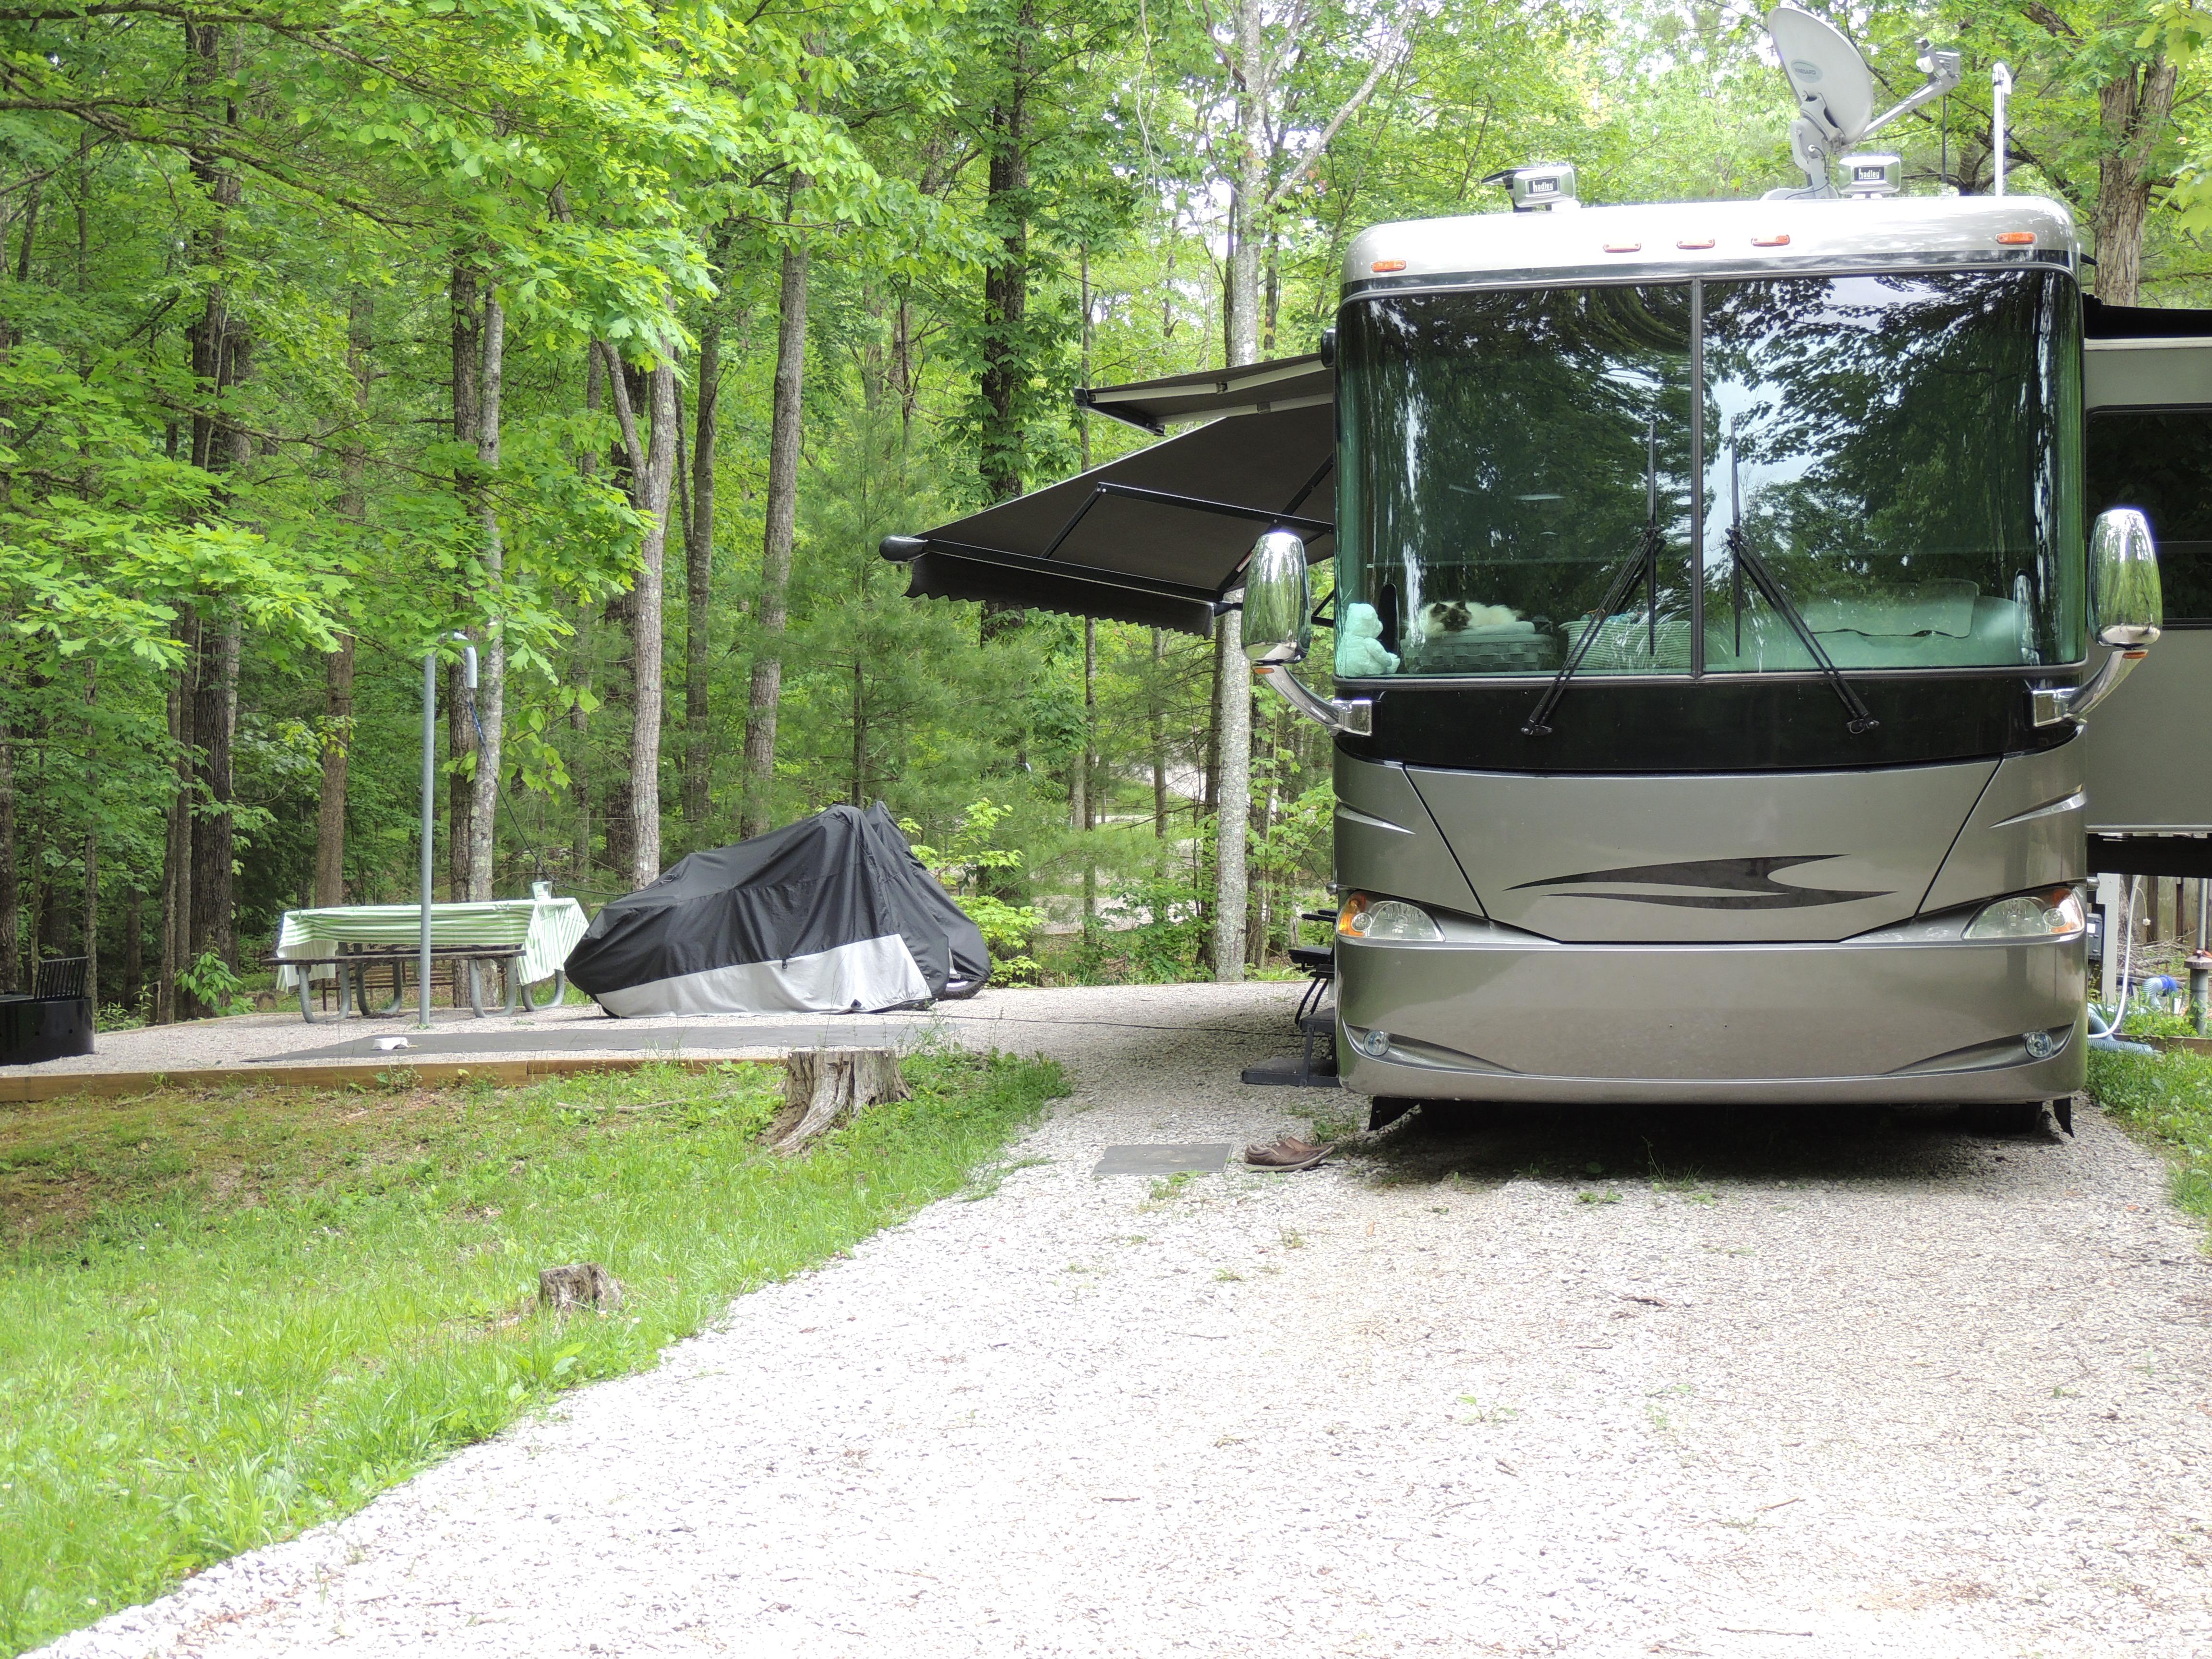 A large black RV is parked next to tent pad with picnic table.